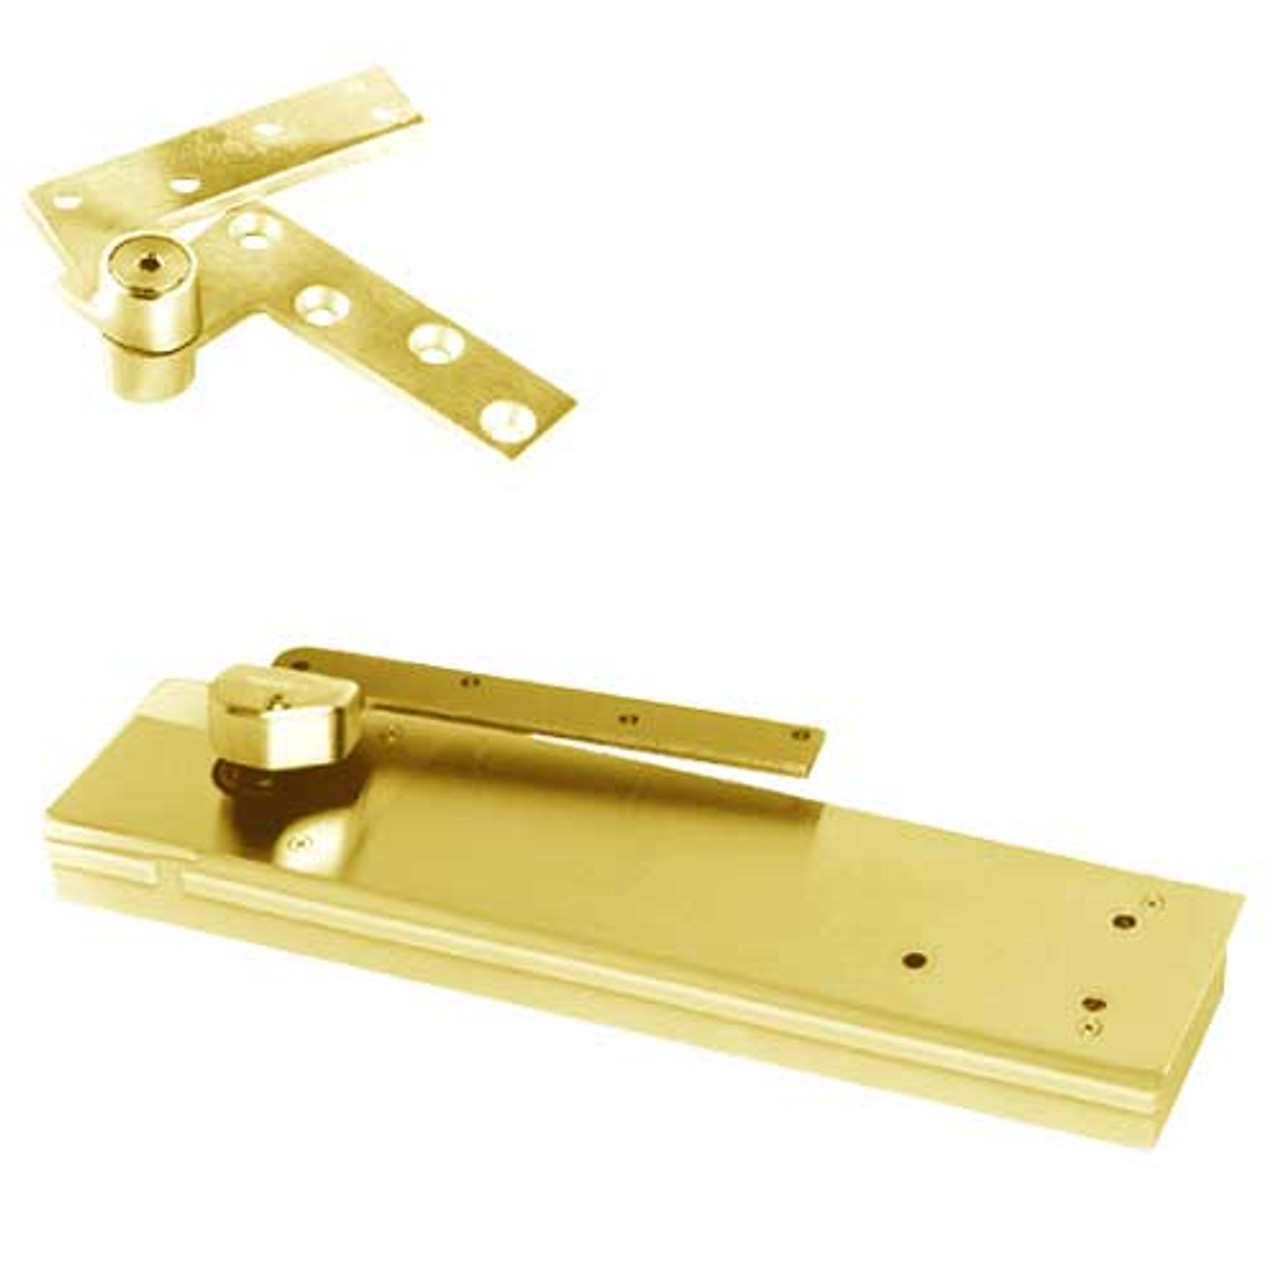 5105ABC180-1-1/2OS-LFP-RH-605 Rixson 51 Series 1-1/2" Offset Hung Shallow Depth Floor Closers in Bright Brass Finish